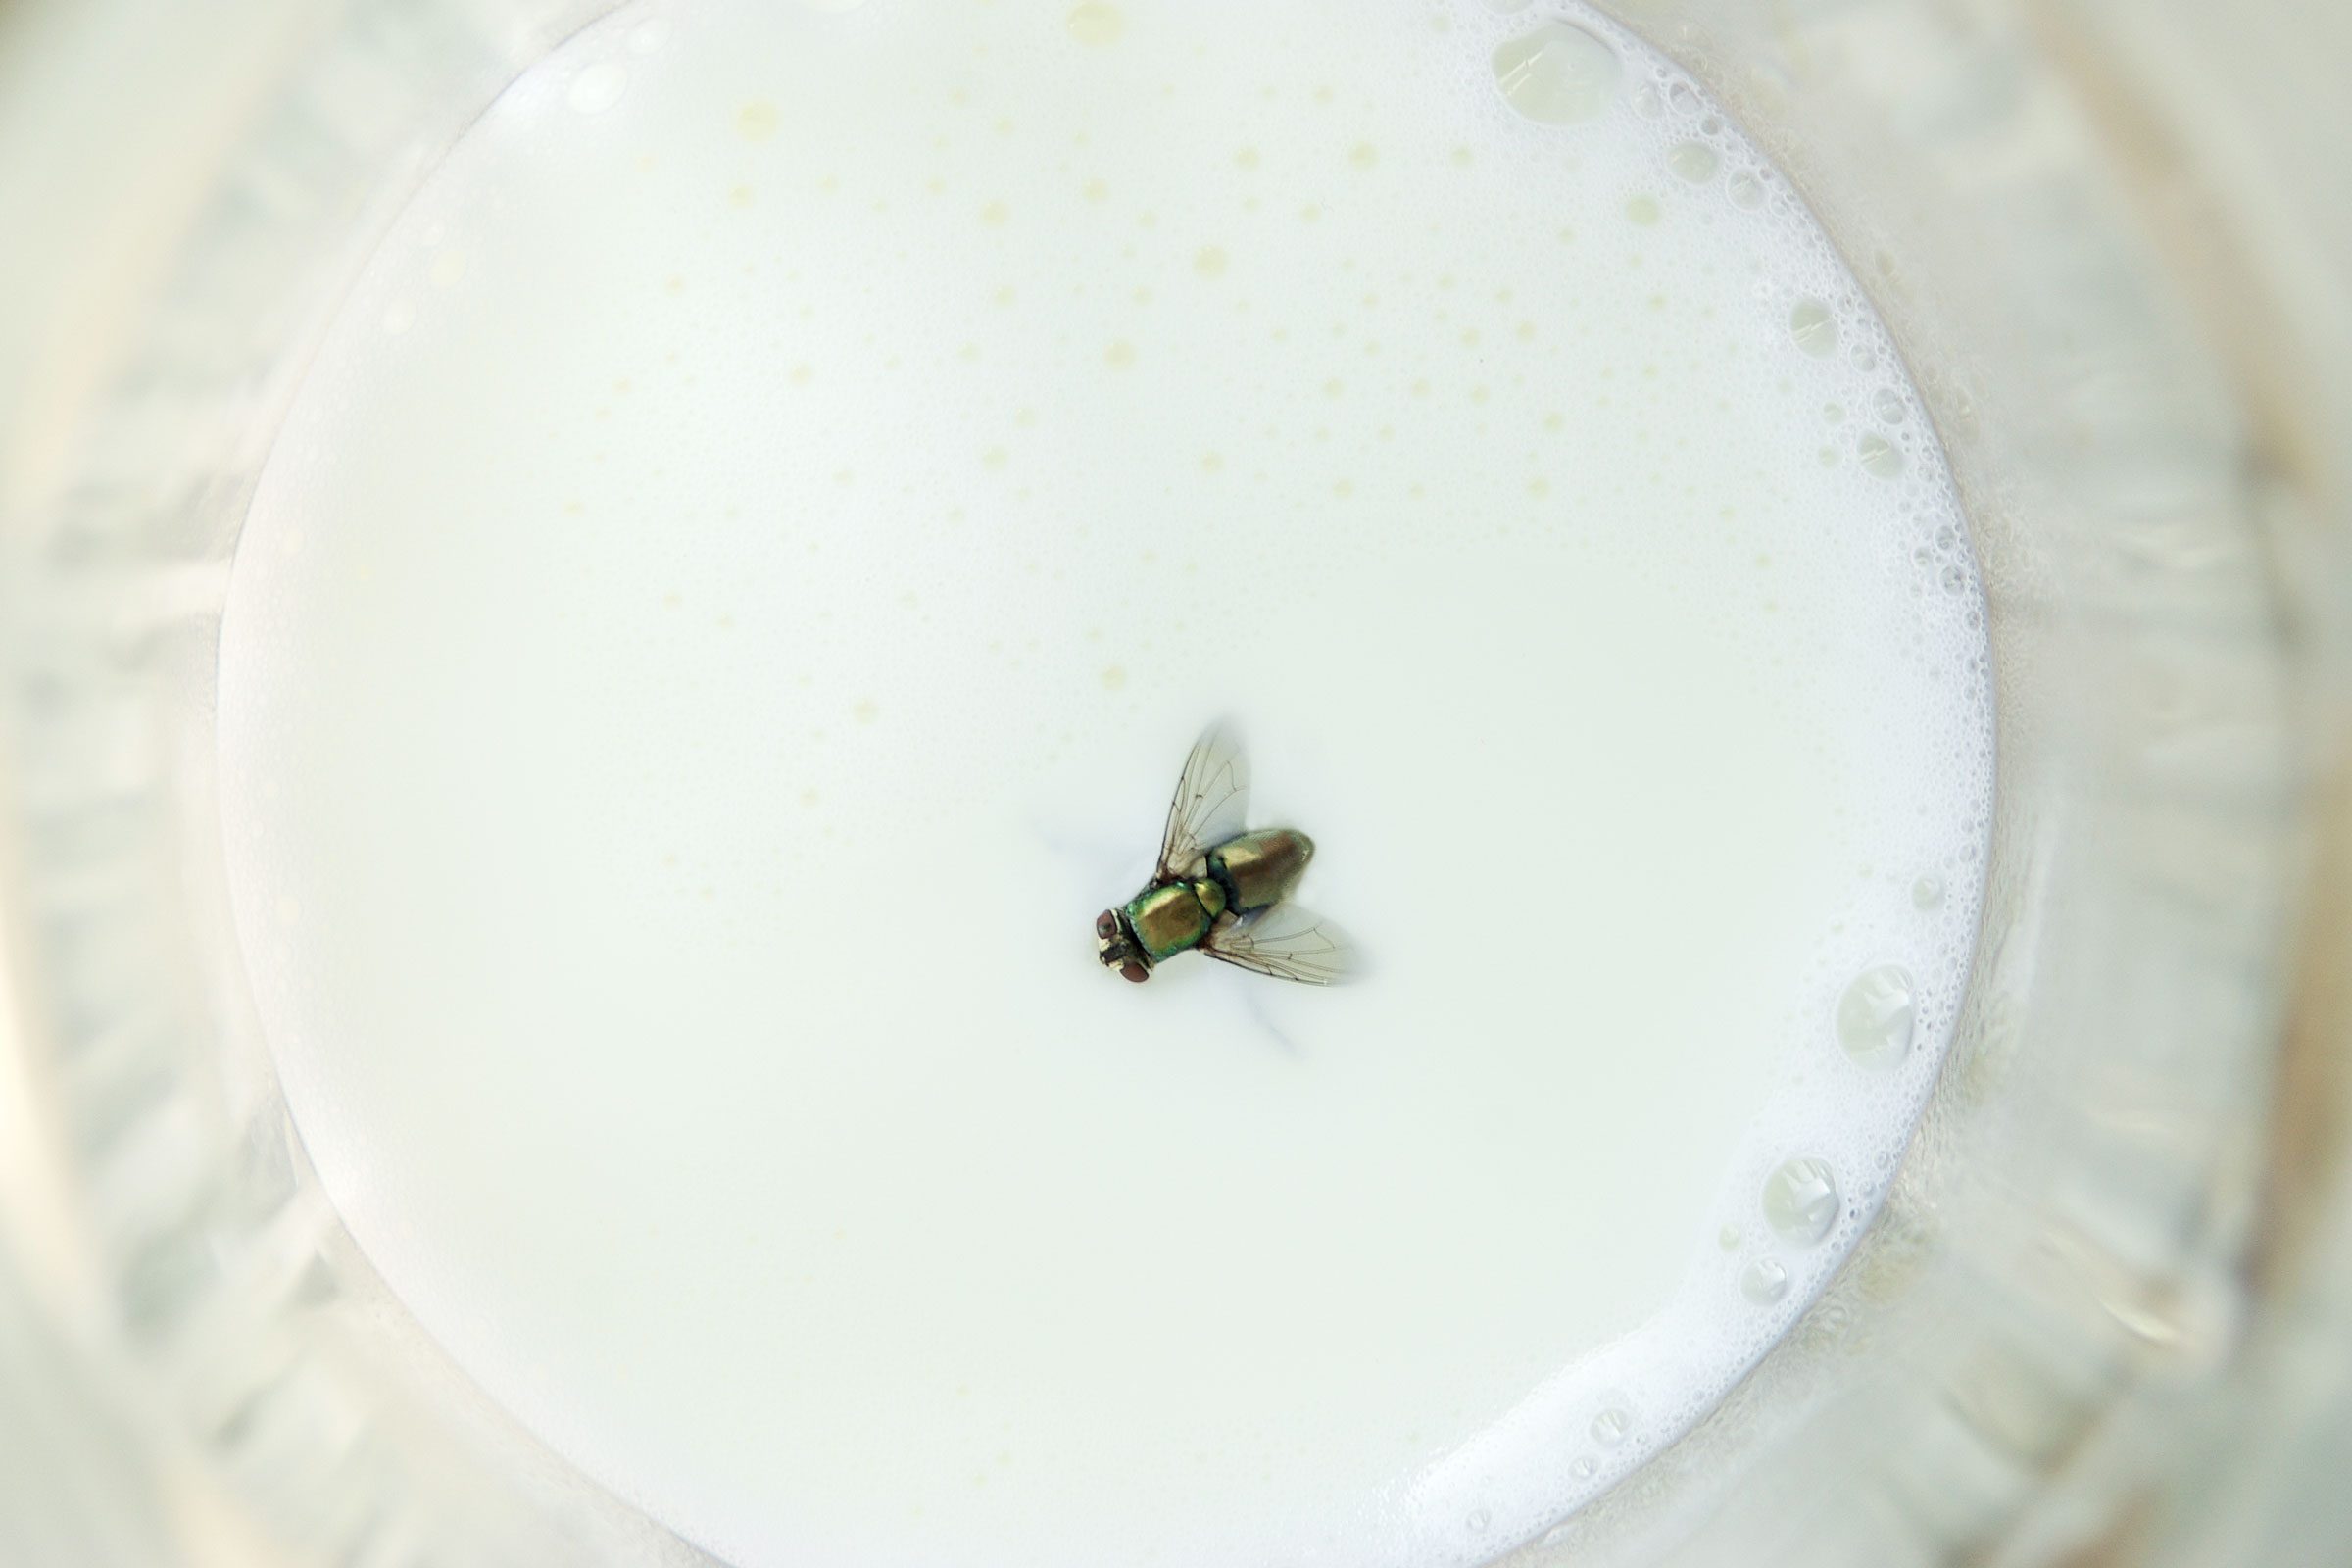 fake fly floating in milk